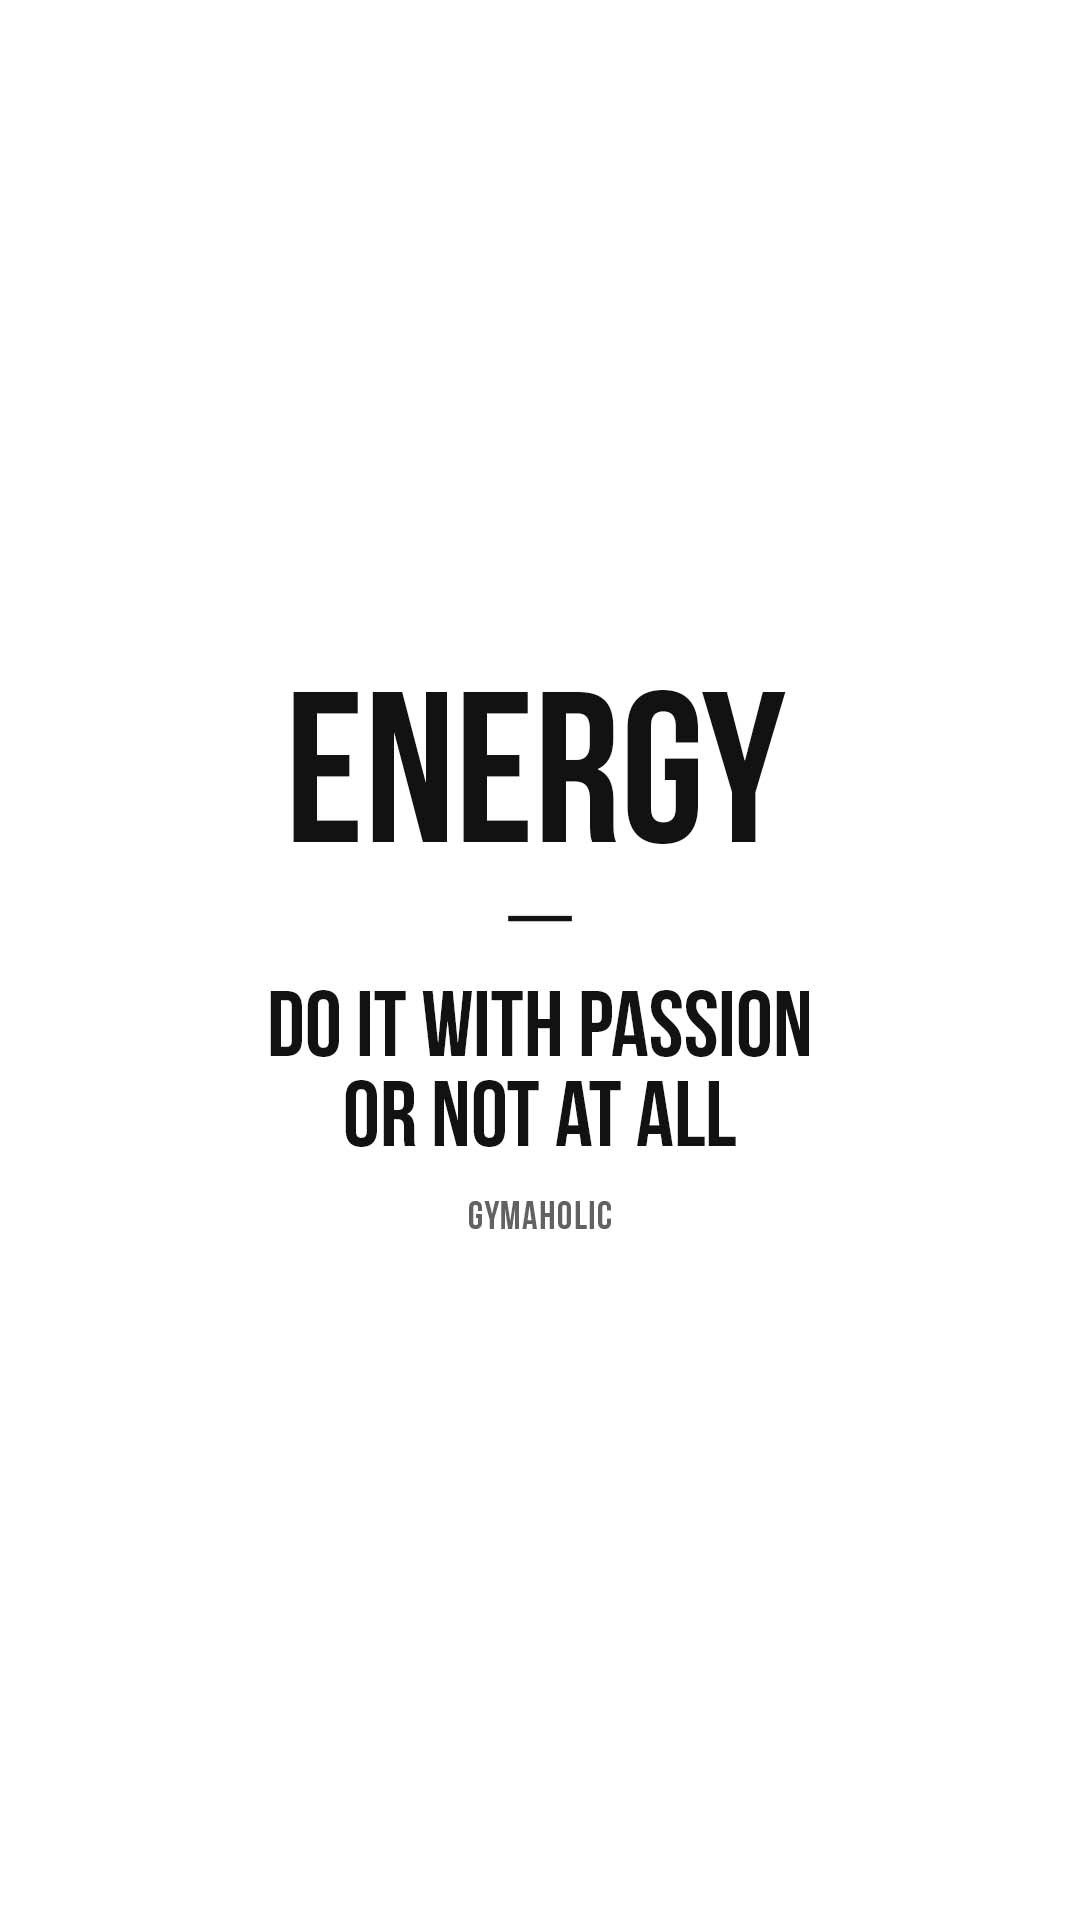 Energy: Do It with Passion or Not at All